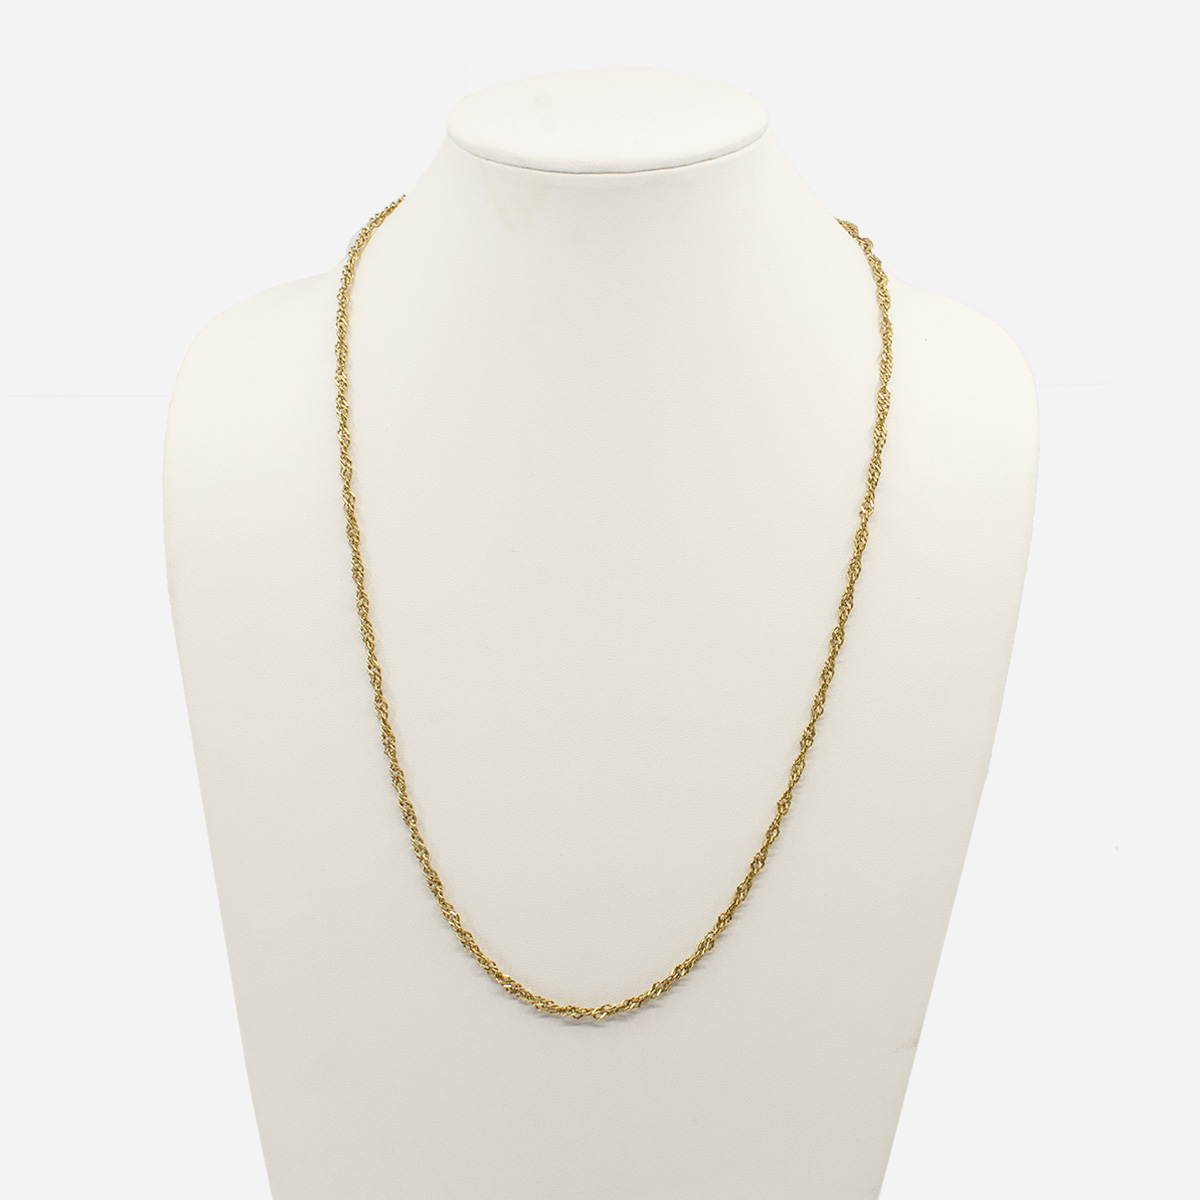 Sarah Coventry gold rope chain